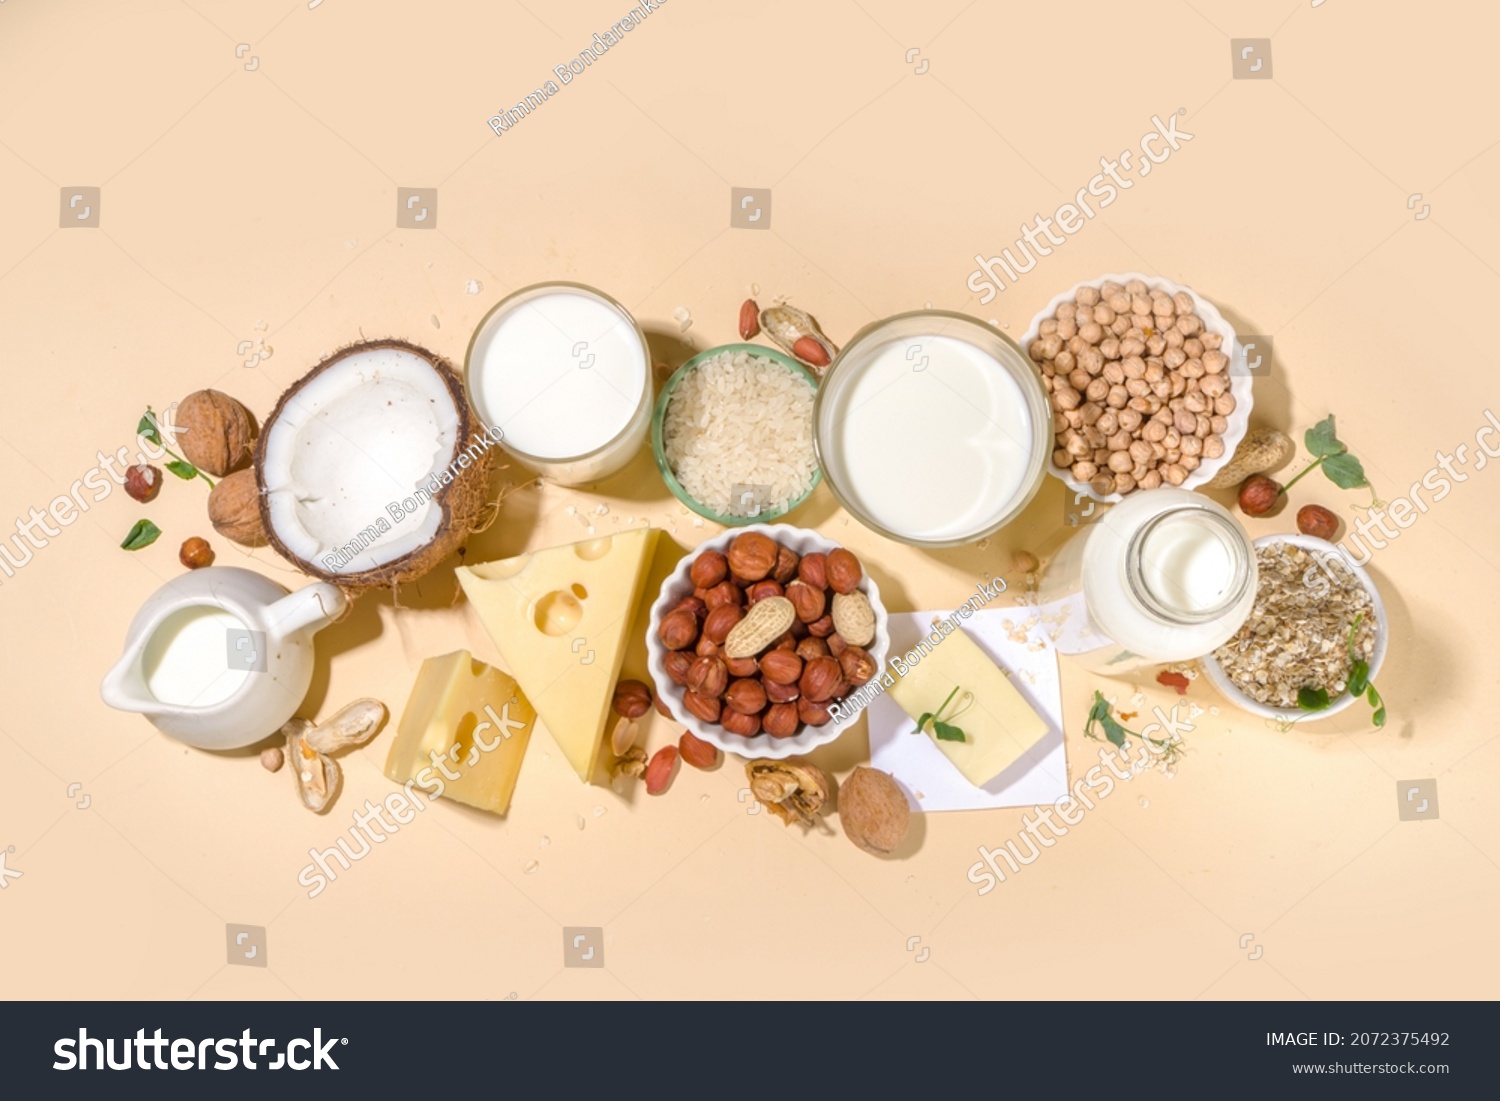 Vegan non-dairy products. Plant-based alternative dairy products – milk, cream, butter, yogurt, cheese, with ingredients - chickpeas, oatmeal, rice, coconut, nuts #2072375492